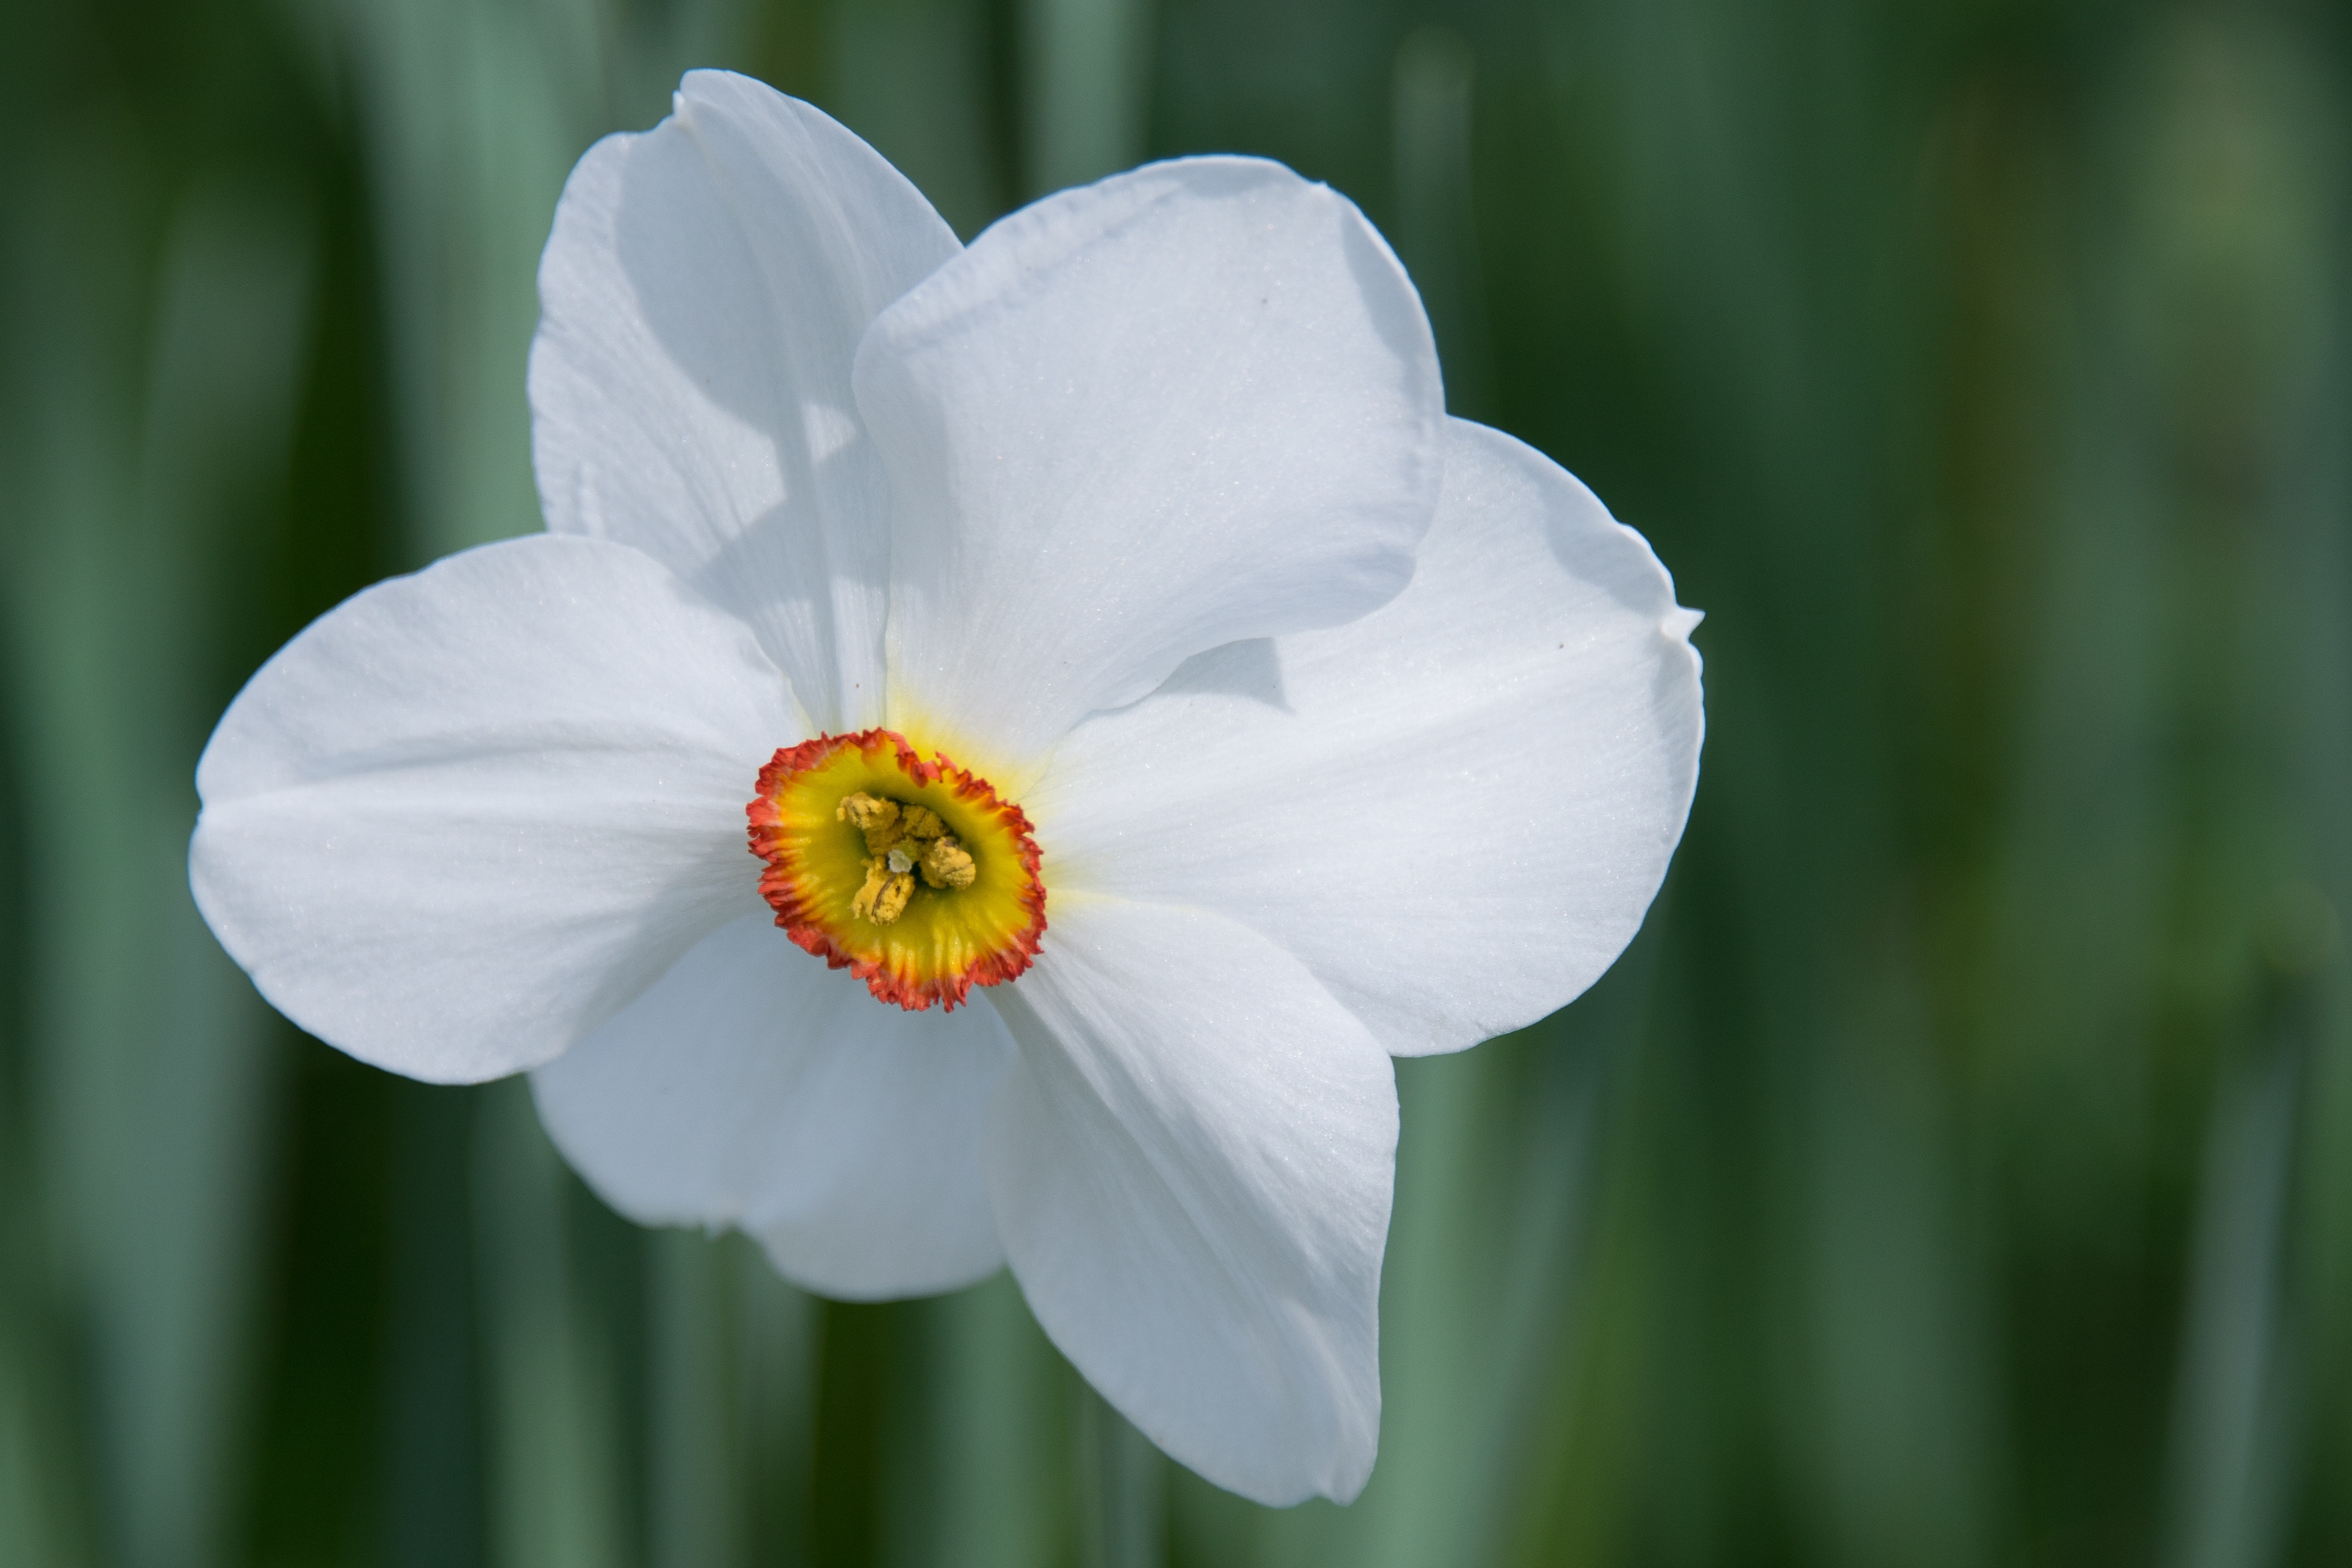 The white petals of a narcissus flower